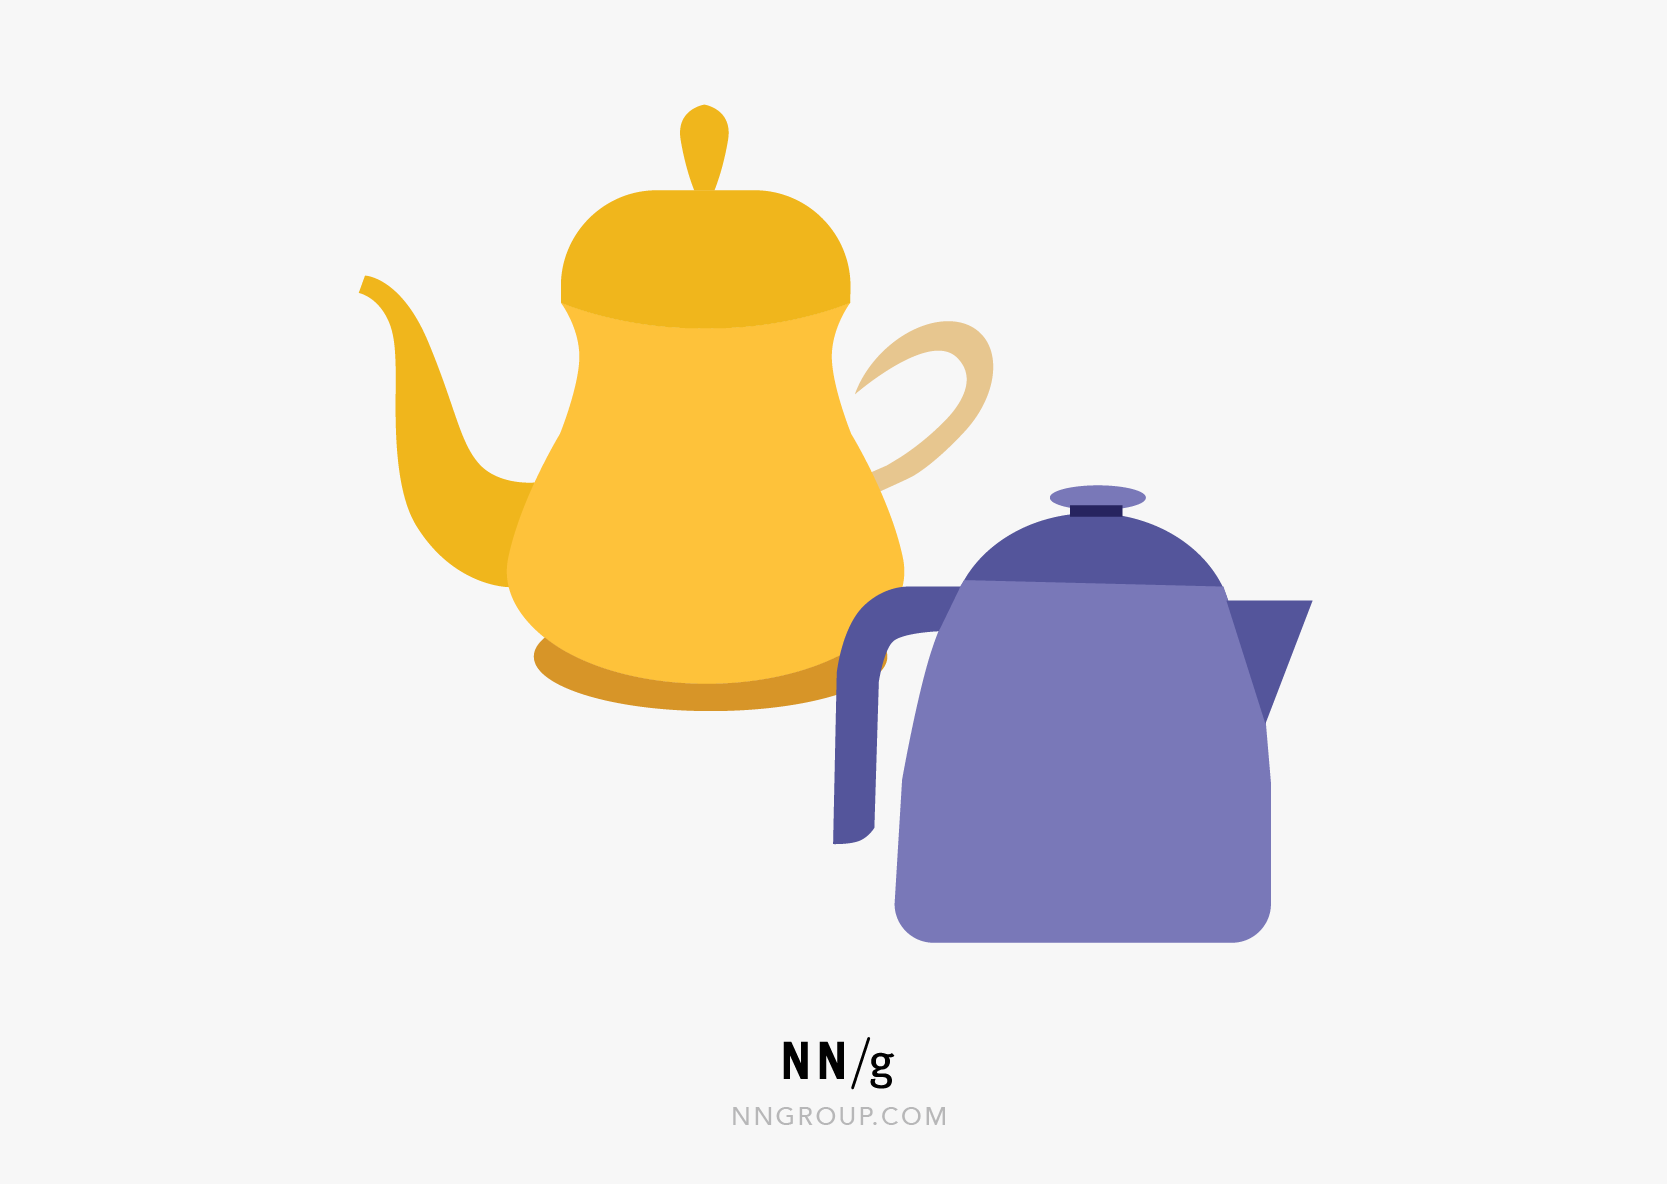 Usability Heuristic #8: Two teapots side by side. One basic and straightforward, the other ornate with a fancy handle and curvy spout.